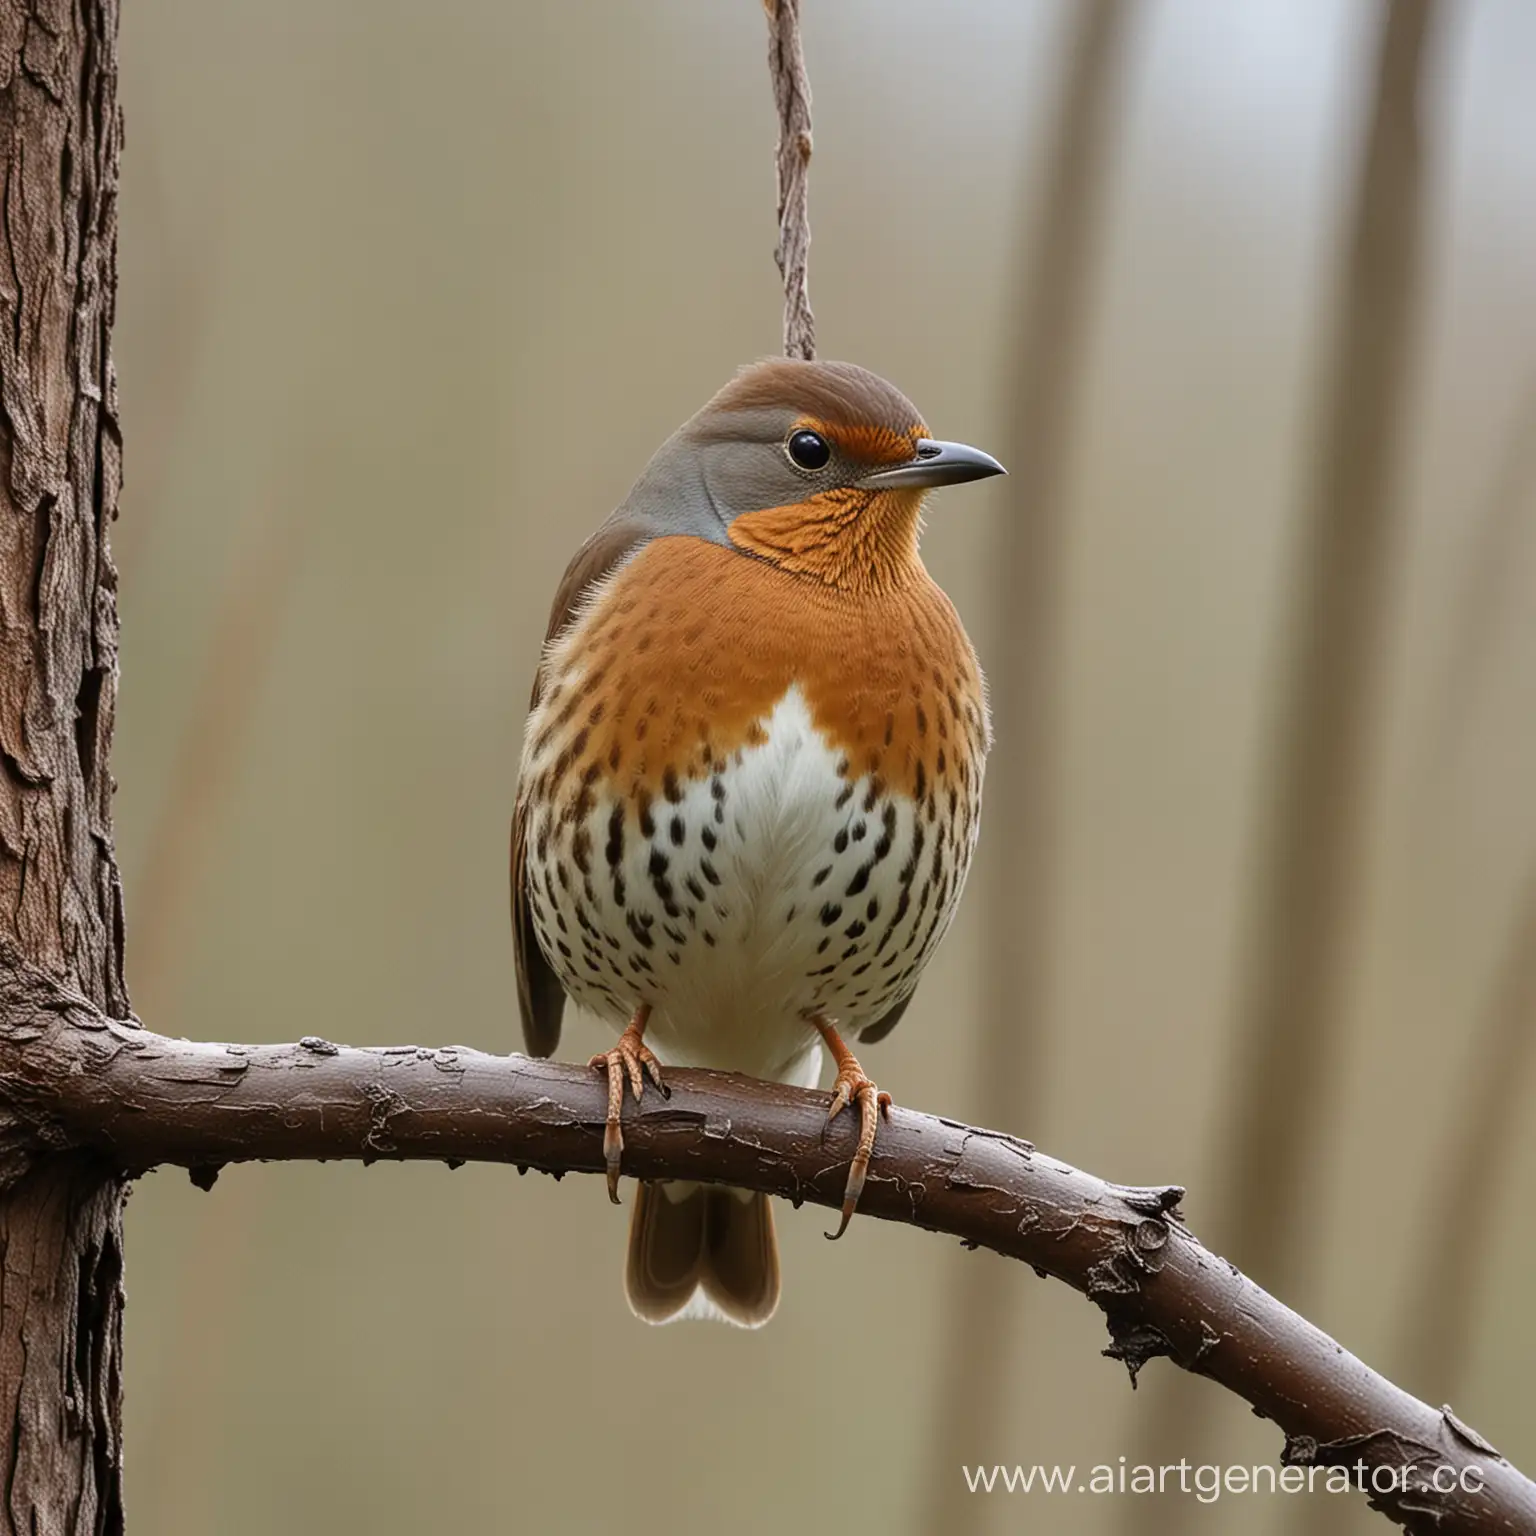 Unusual-Bird-Thrush-with-Large-Human-Testicles-Perched-on-Branch